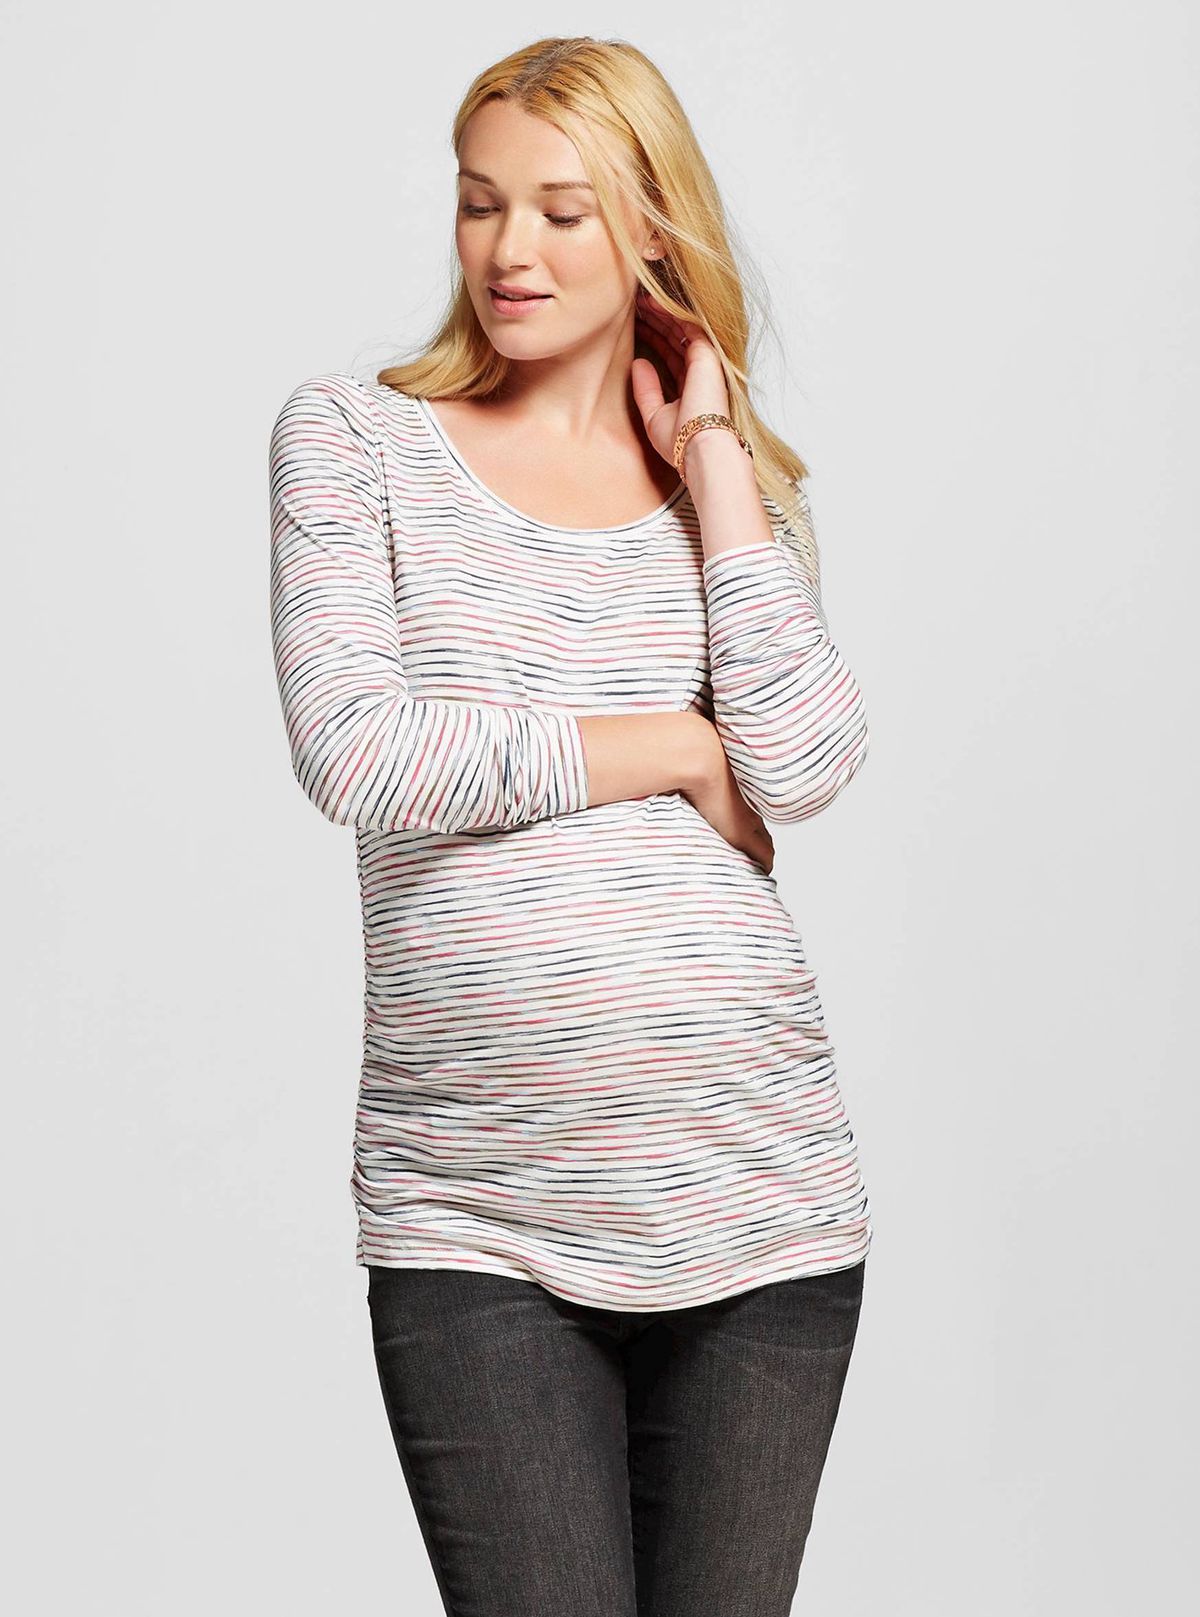 A model in a Target Maternity Scoop Tee